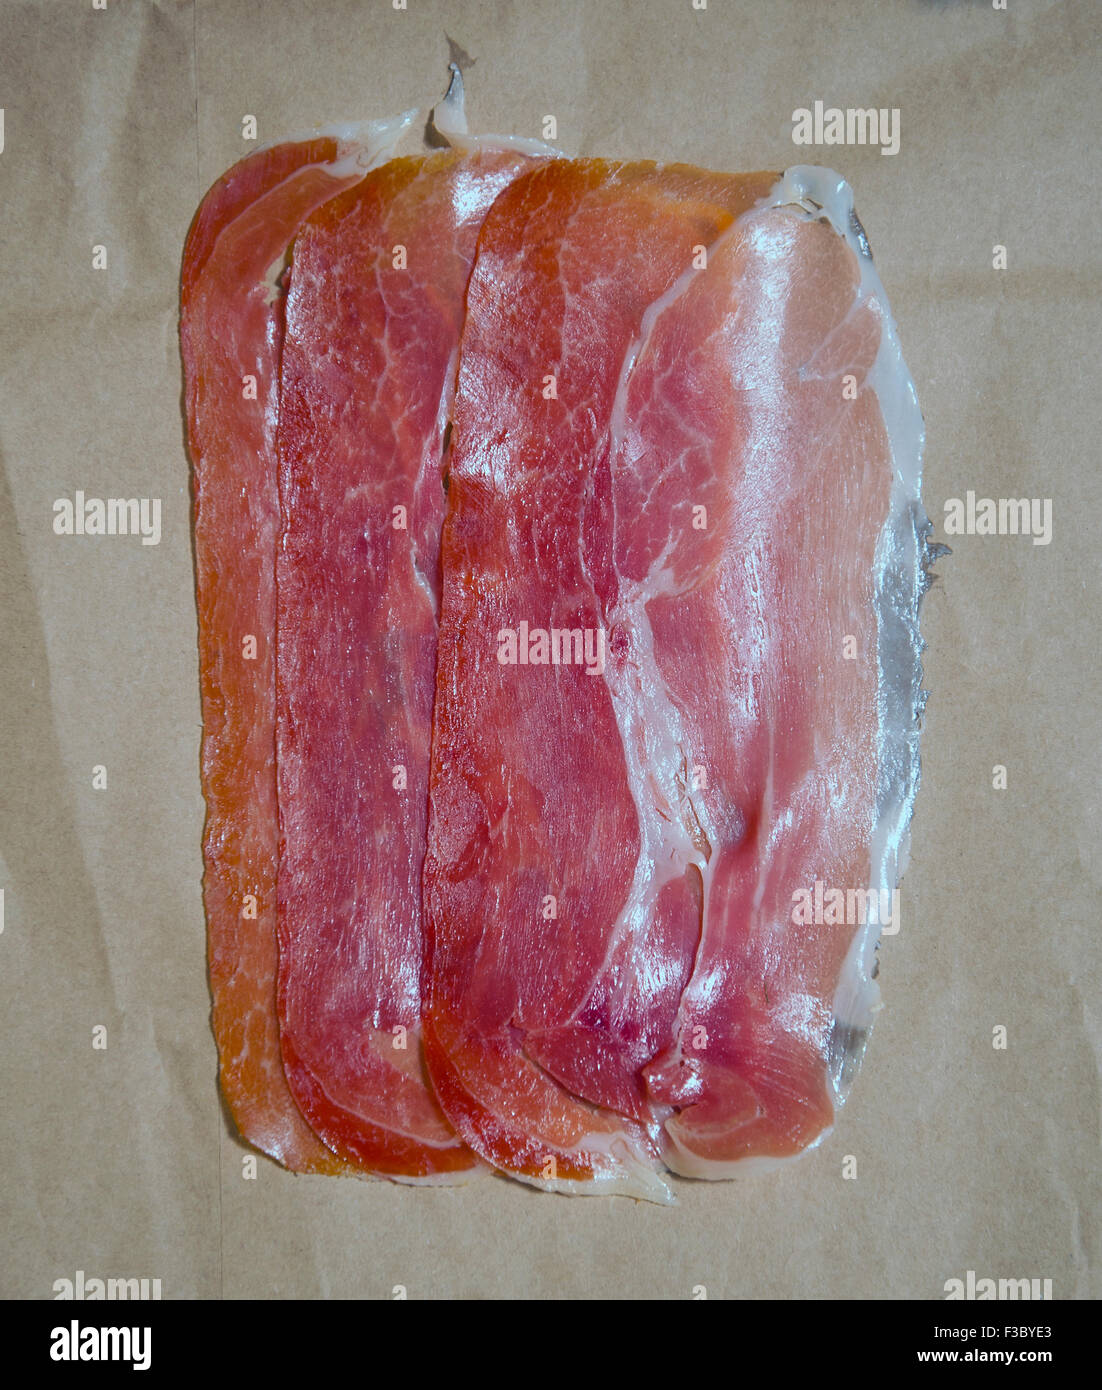 Overhead view of slices of cured ham Stock Photo